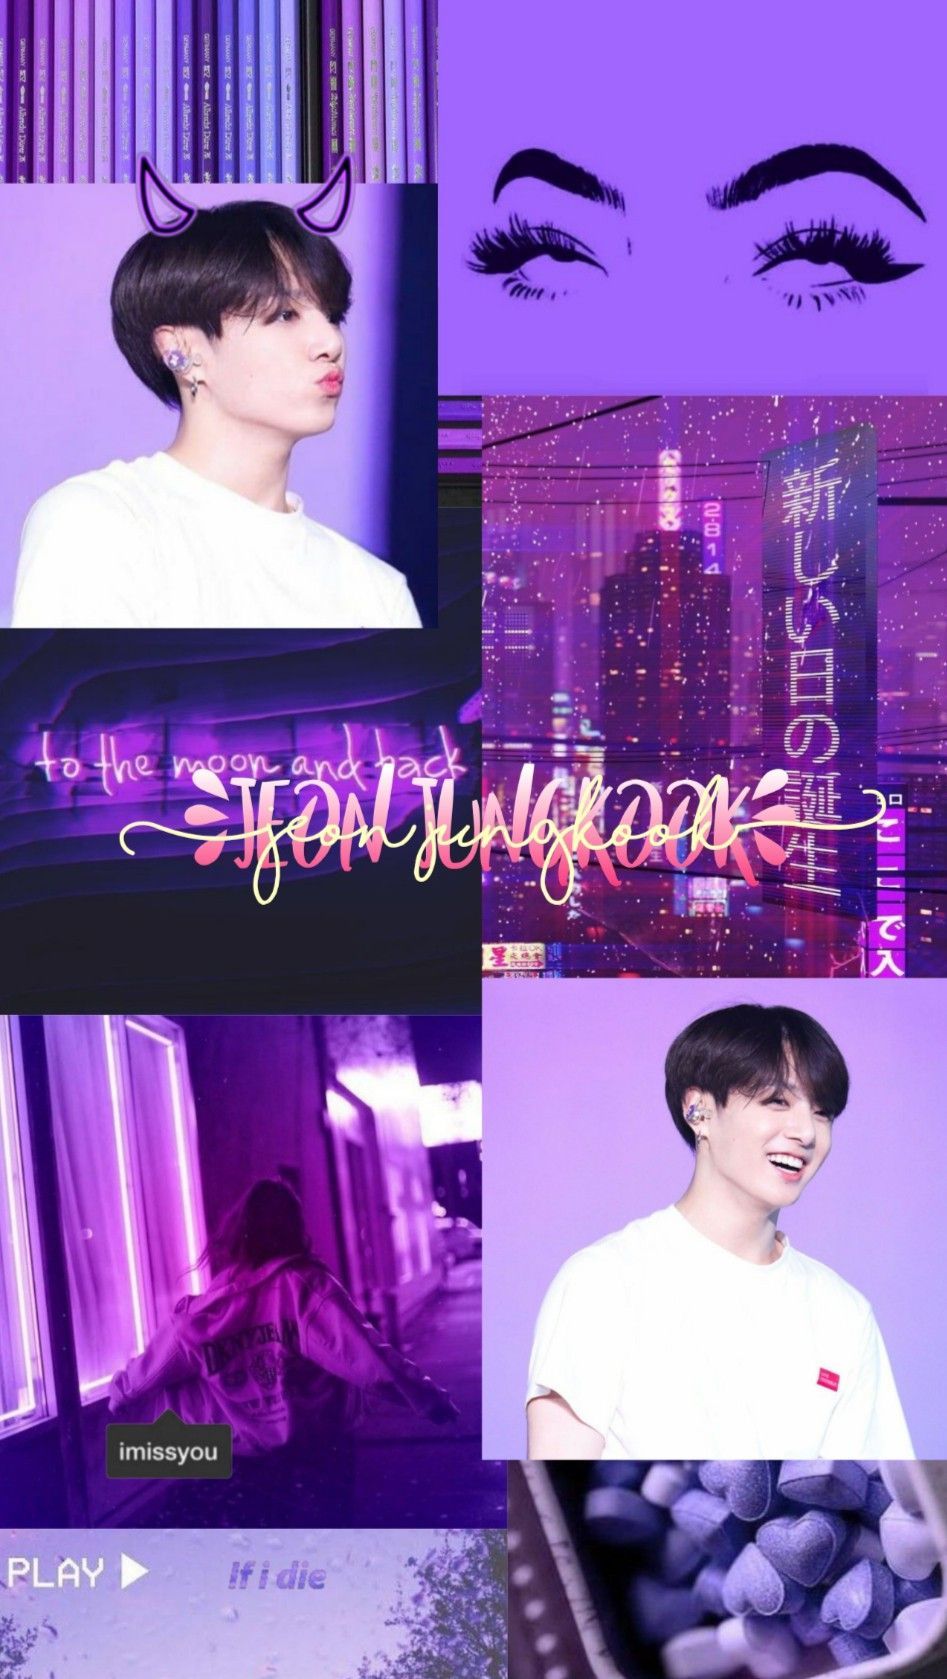 A collage of pictures with different colors and text - Jungkook